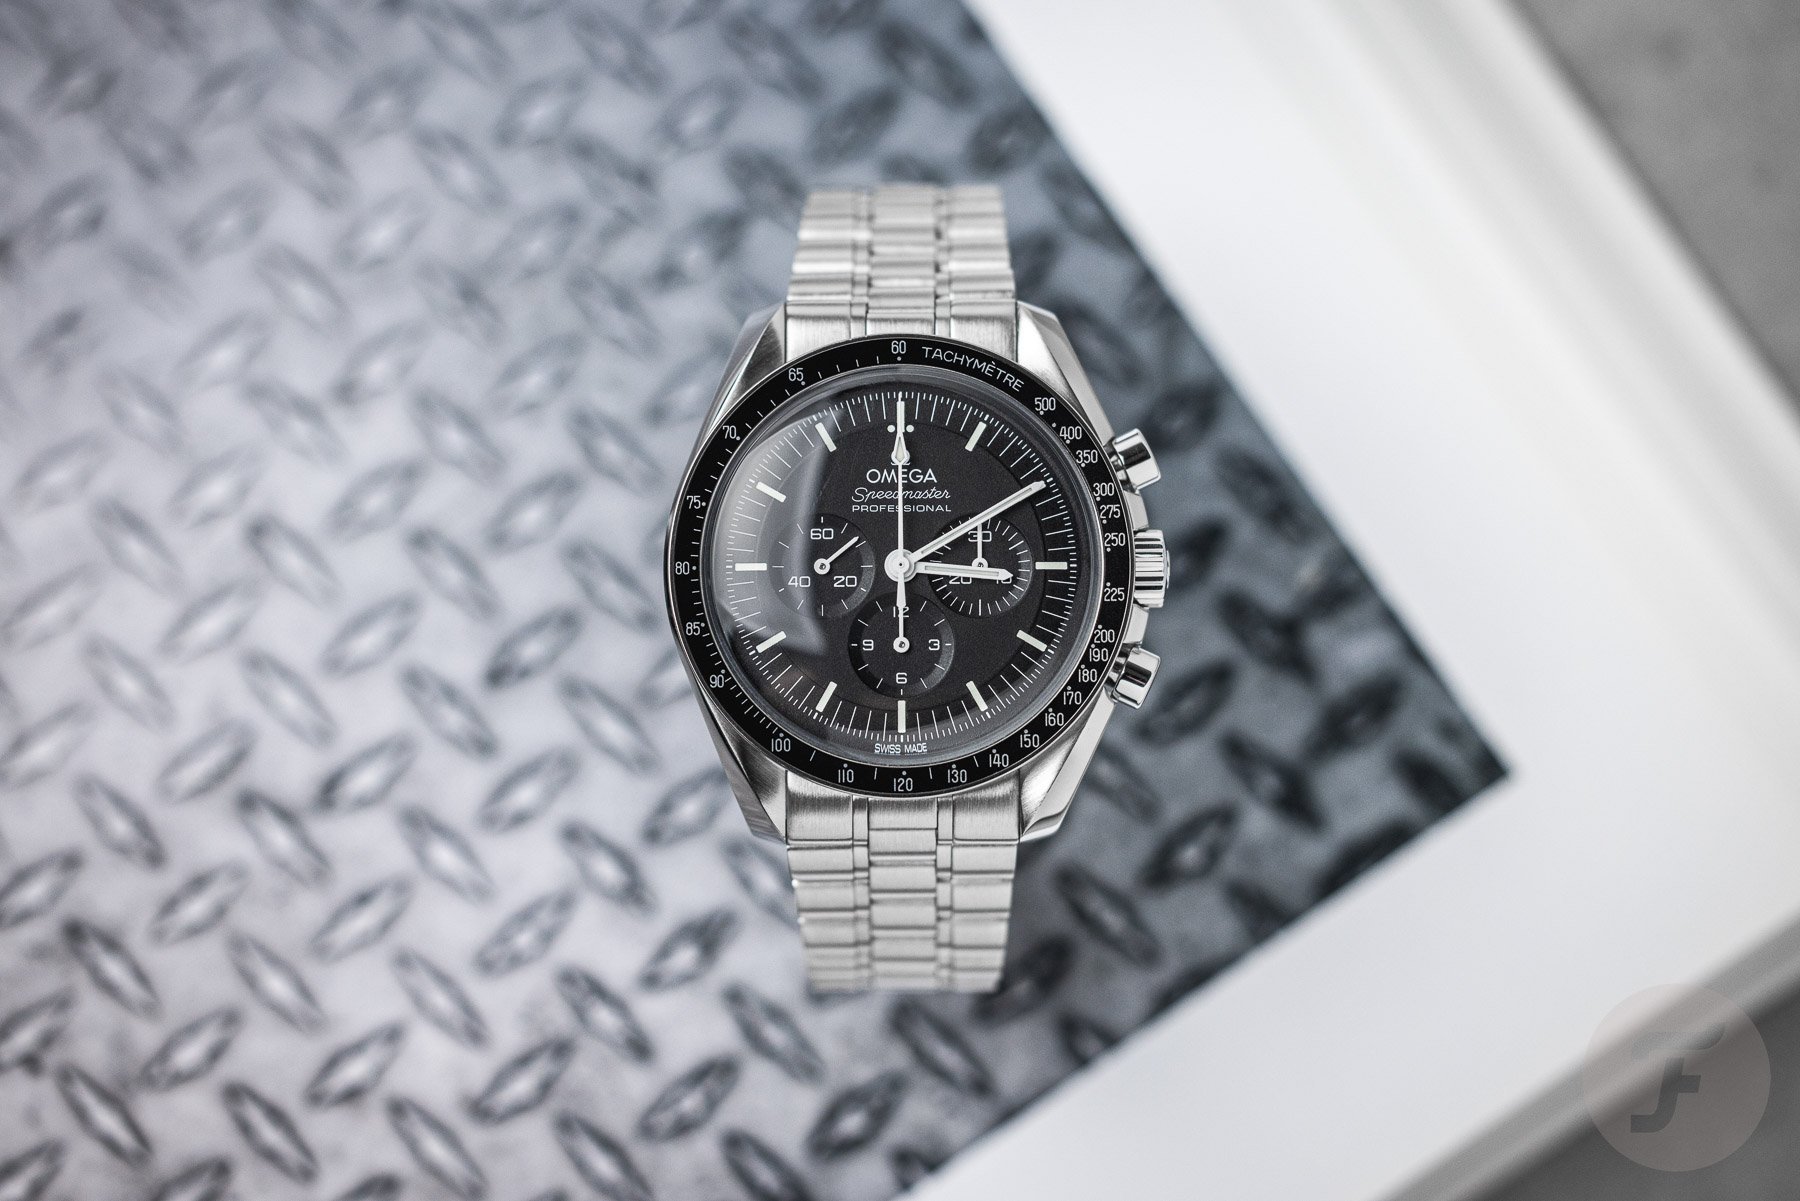 How Good Is The Current Speedmaster Professional Moonwatch?